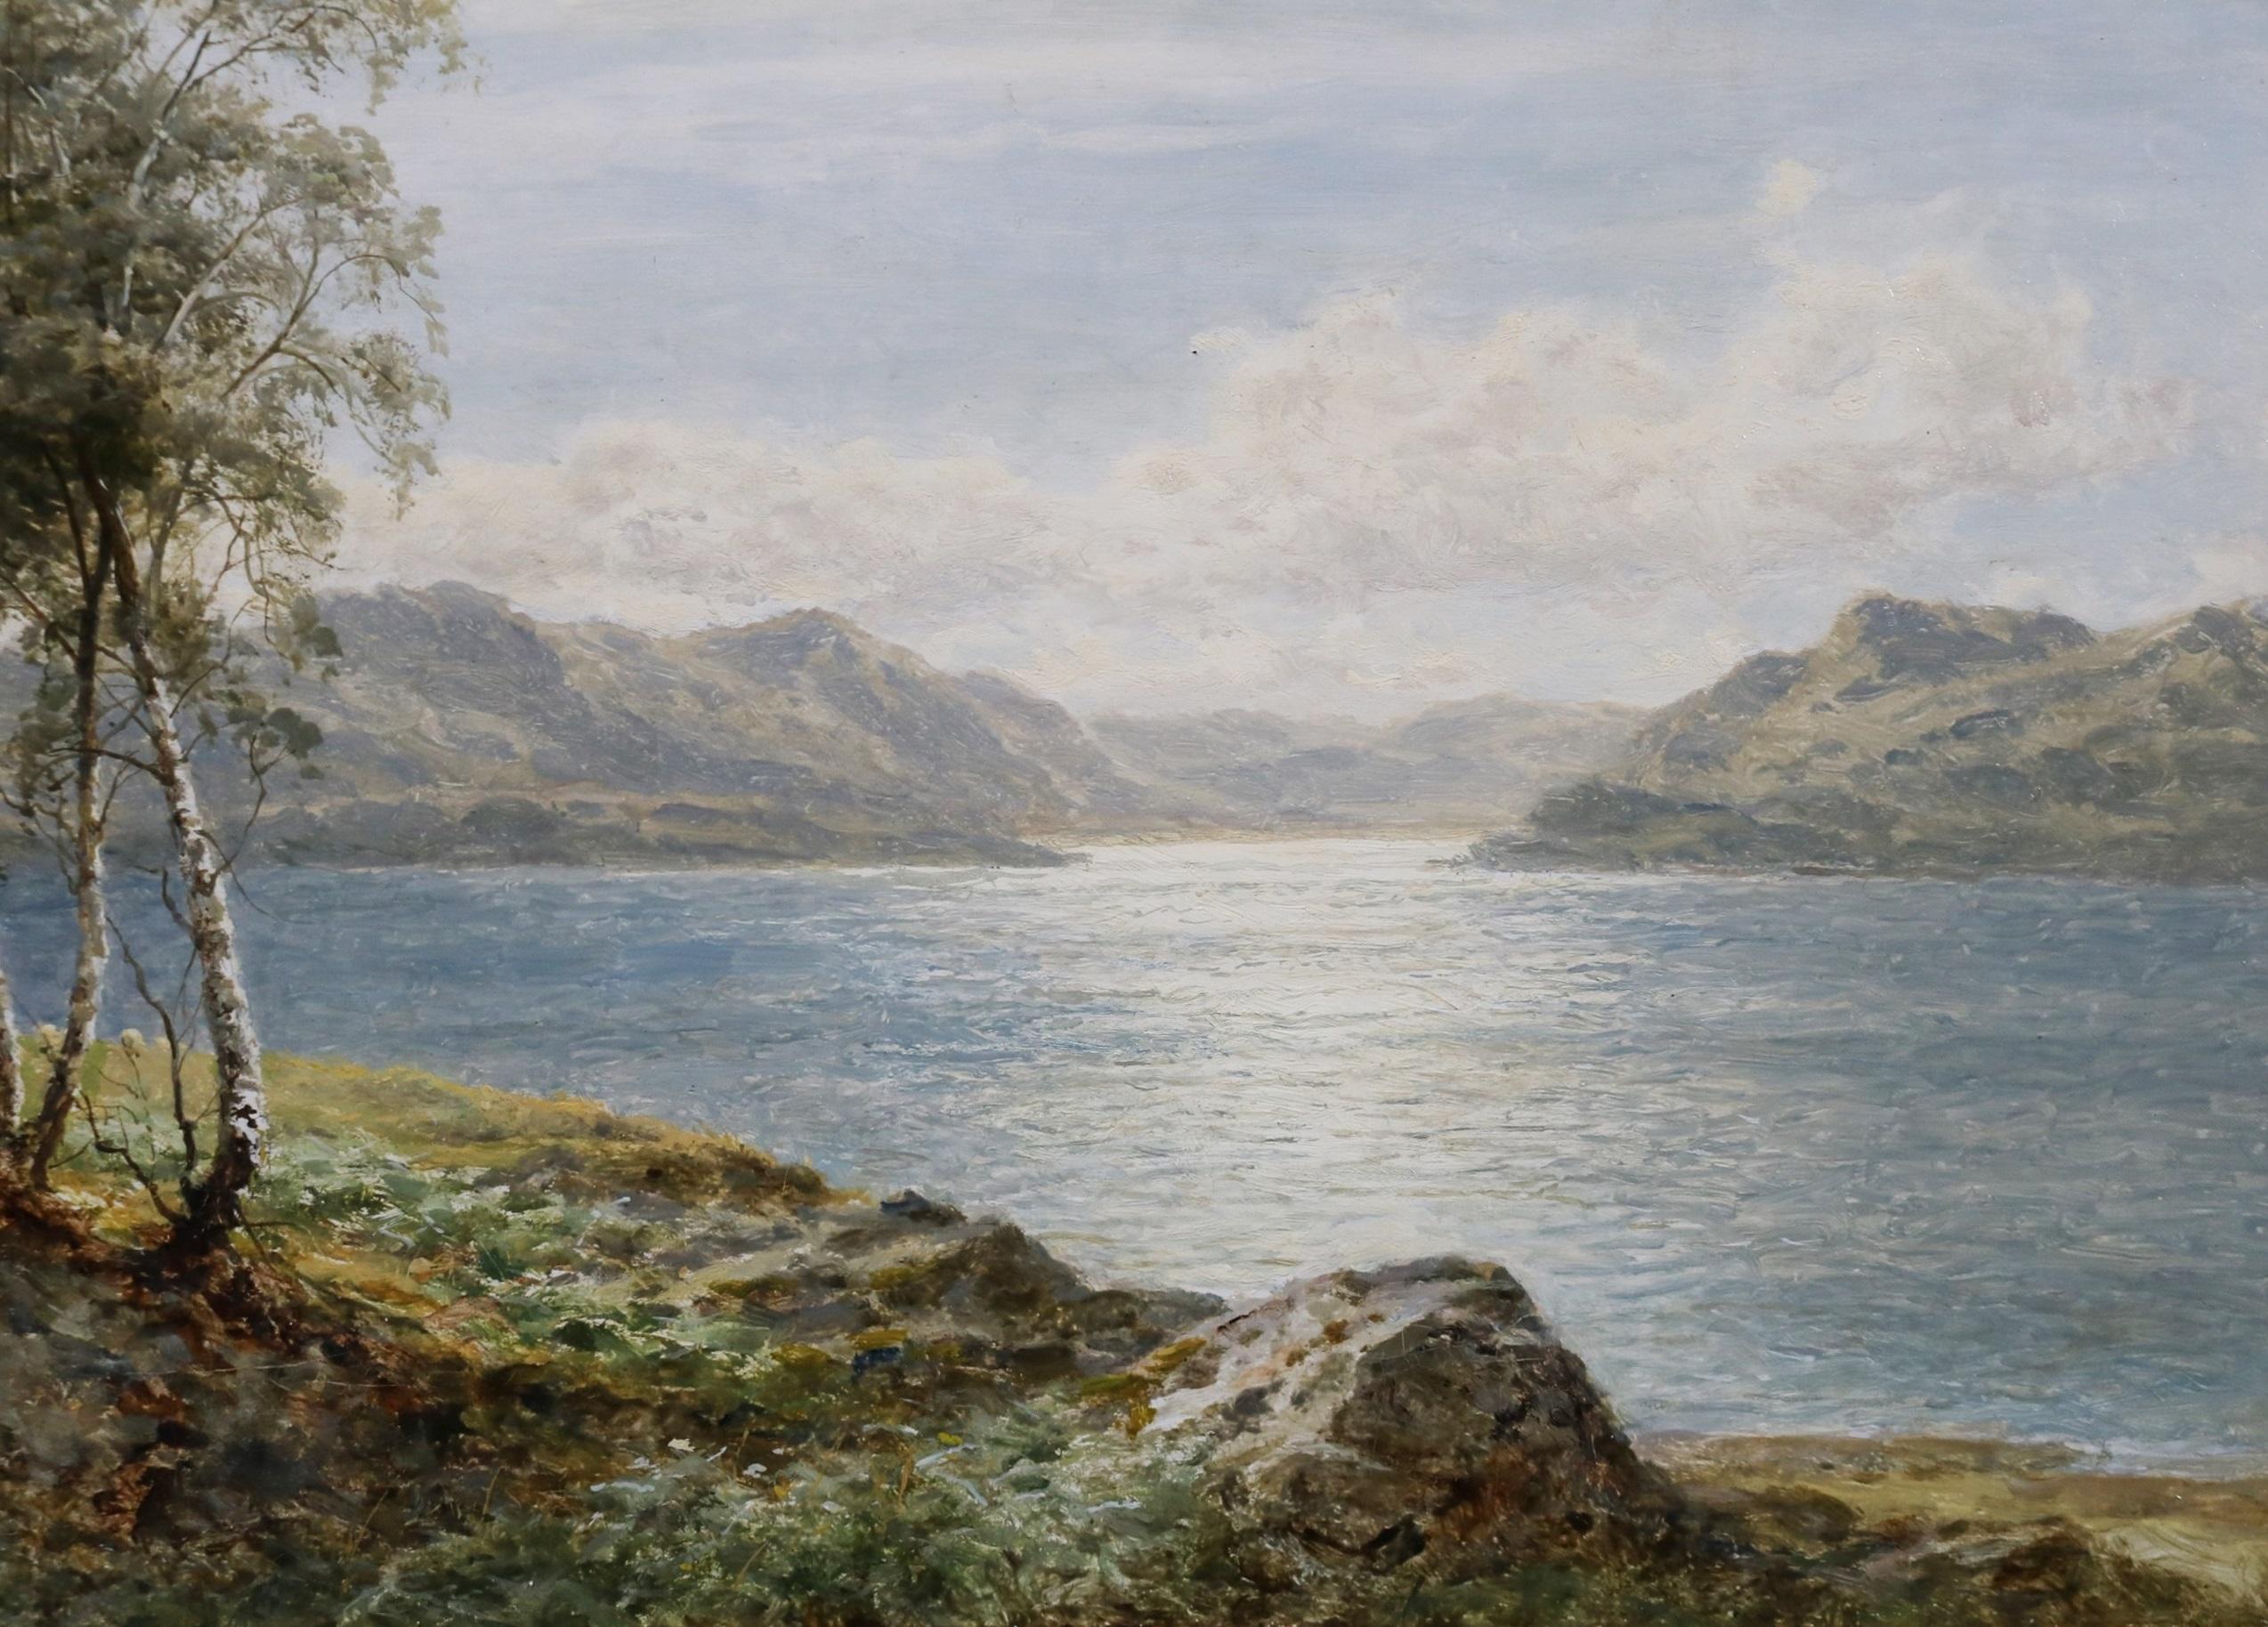 ‘The Edge of Derwentwater’ by Benjamin Williams Leader (1831-1923). The painting – which depicts a couple and their dog lying beneath silver birch trees on the banks of Derwentwater in the Lake District of Cumbria of the North East of England - is